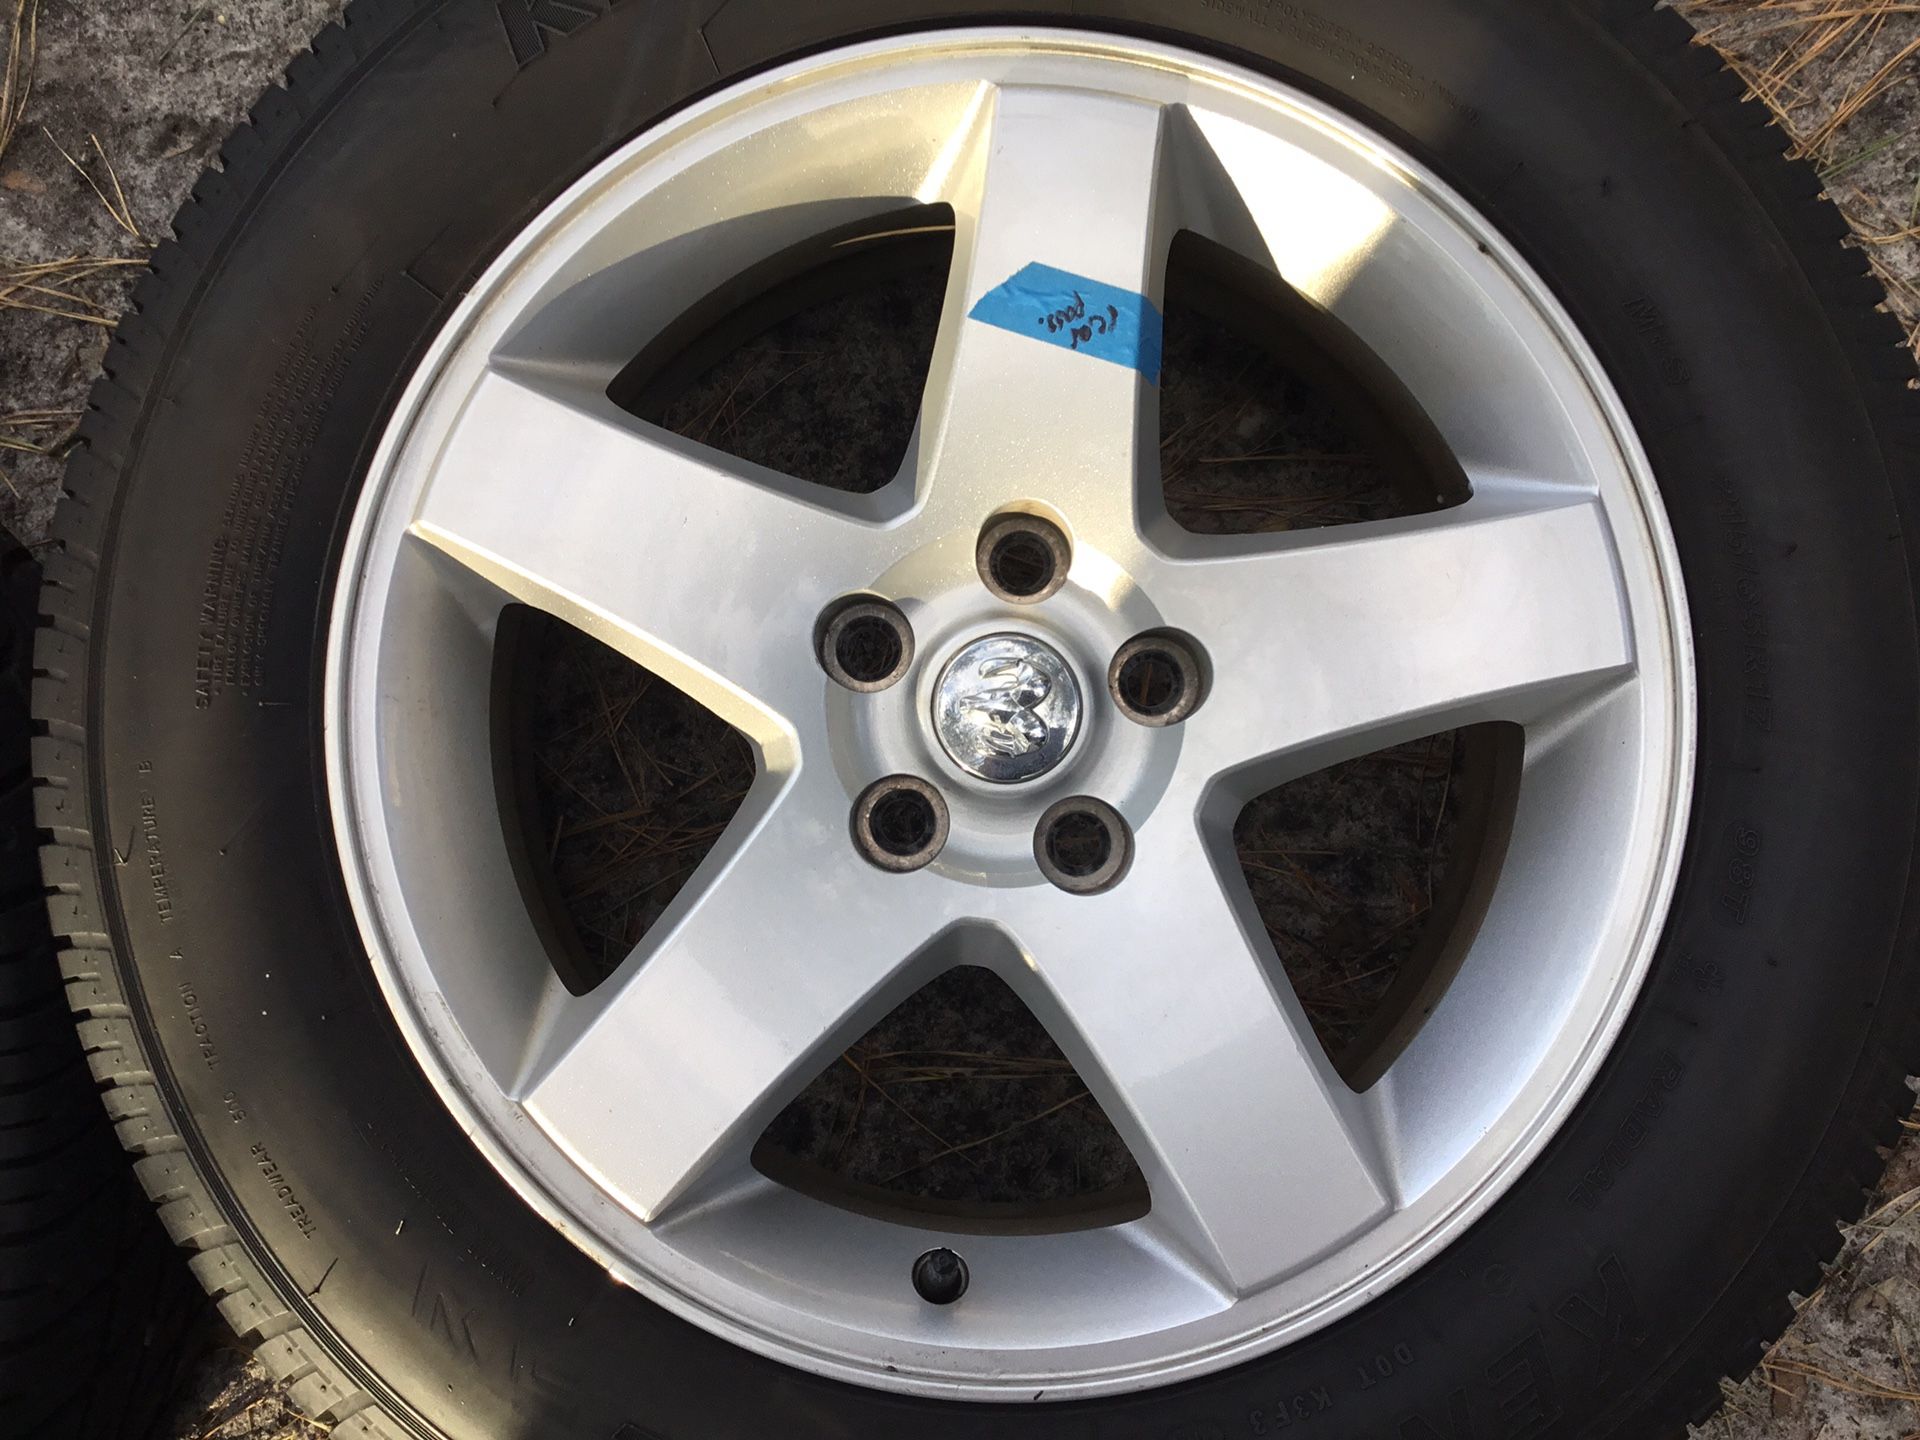 Dodge Challenger 17” Wheels OEM w tpms sensors and two New Kenda tires